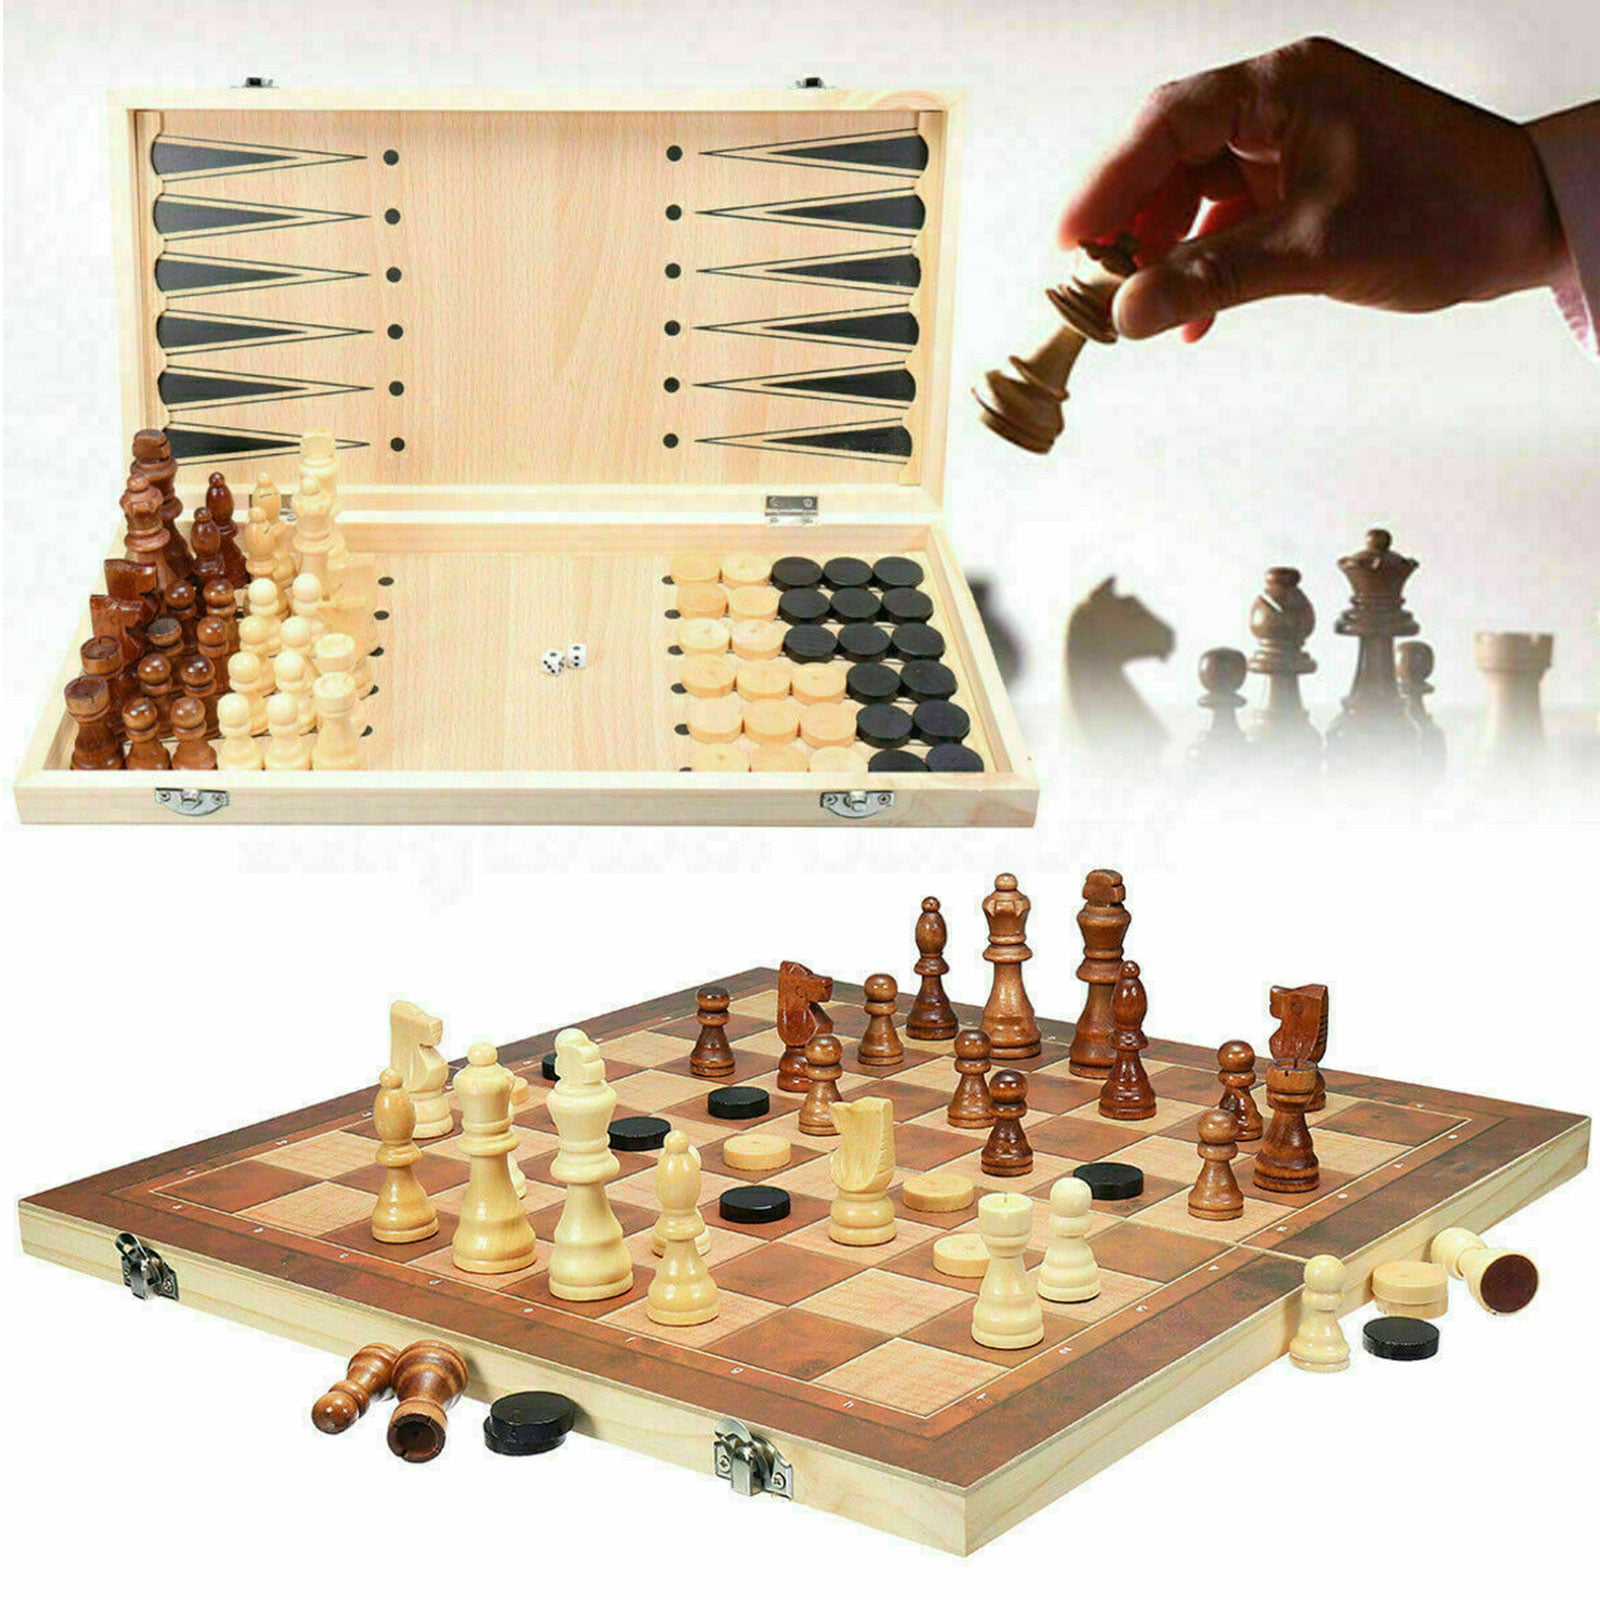 Portable chess wood pieces and board-simply version with wood foldable box board 